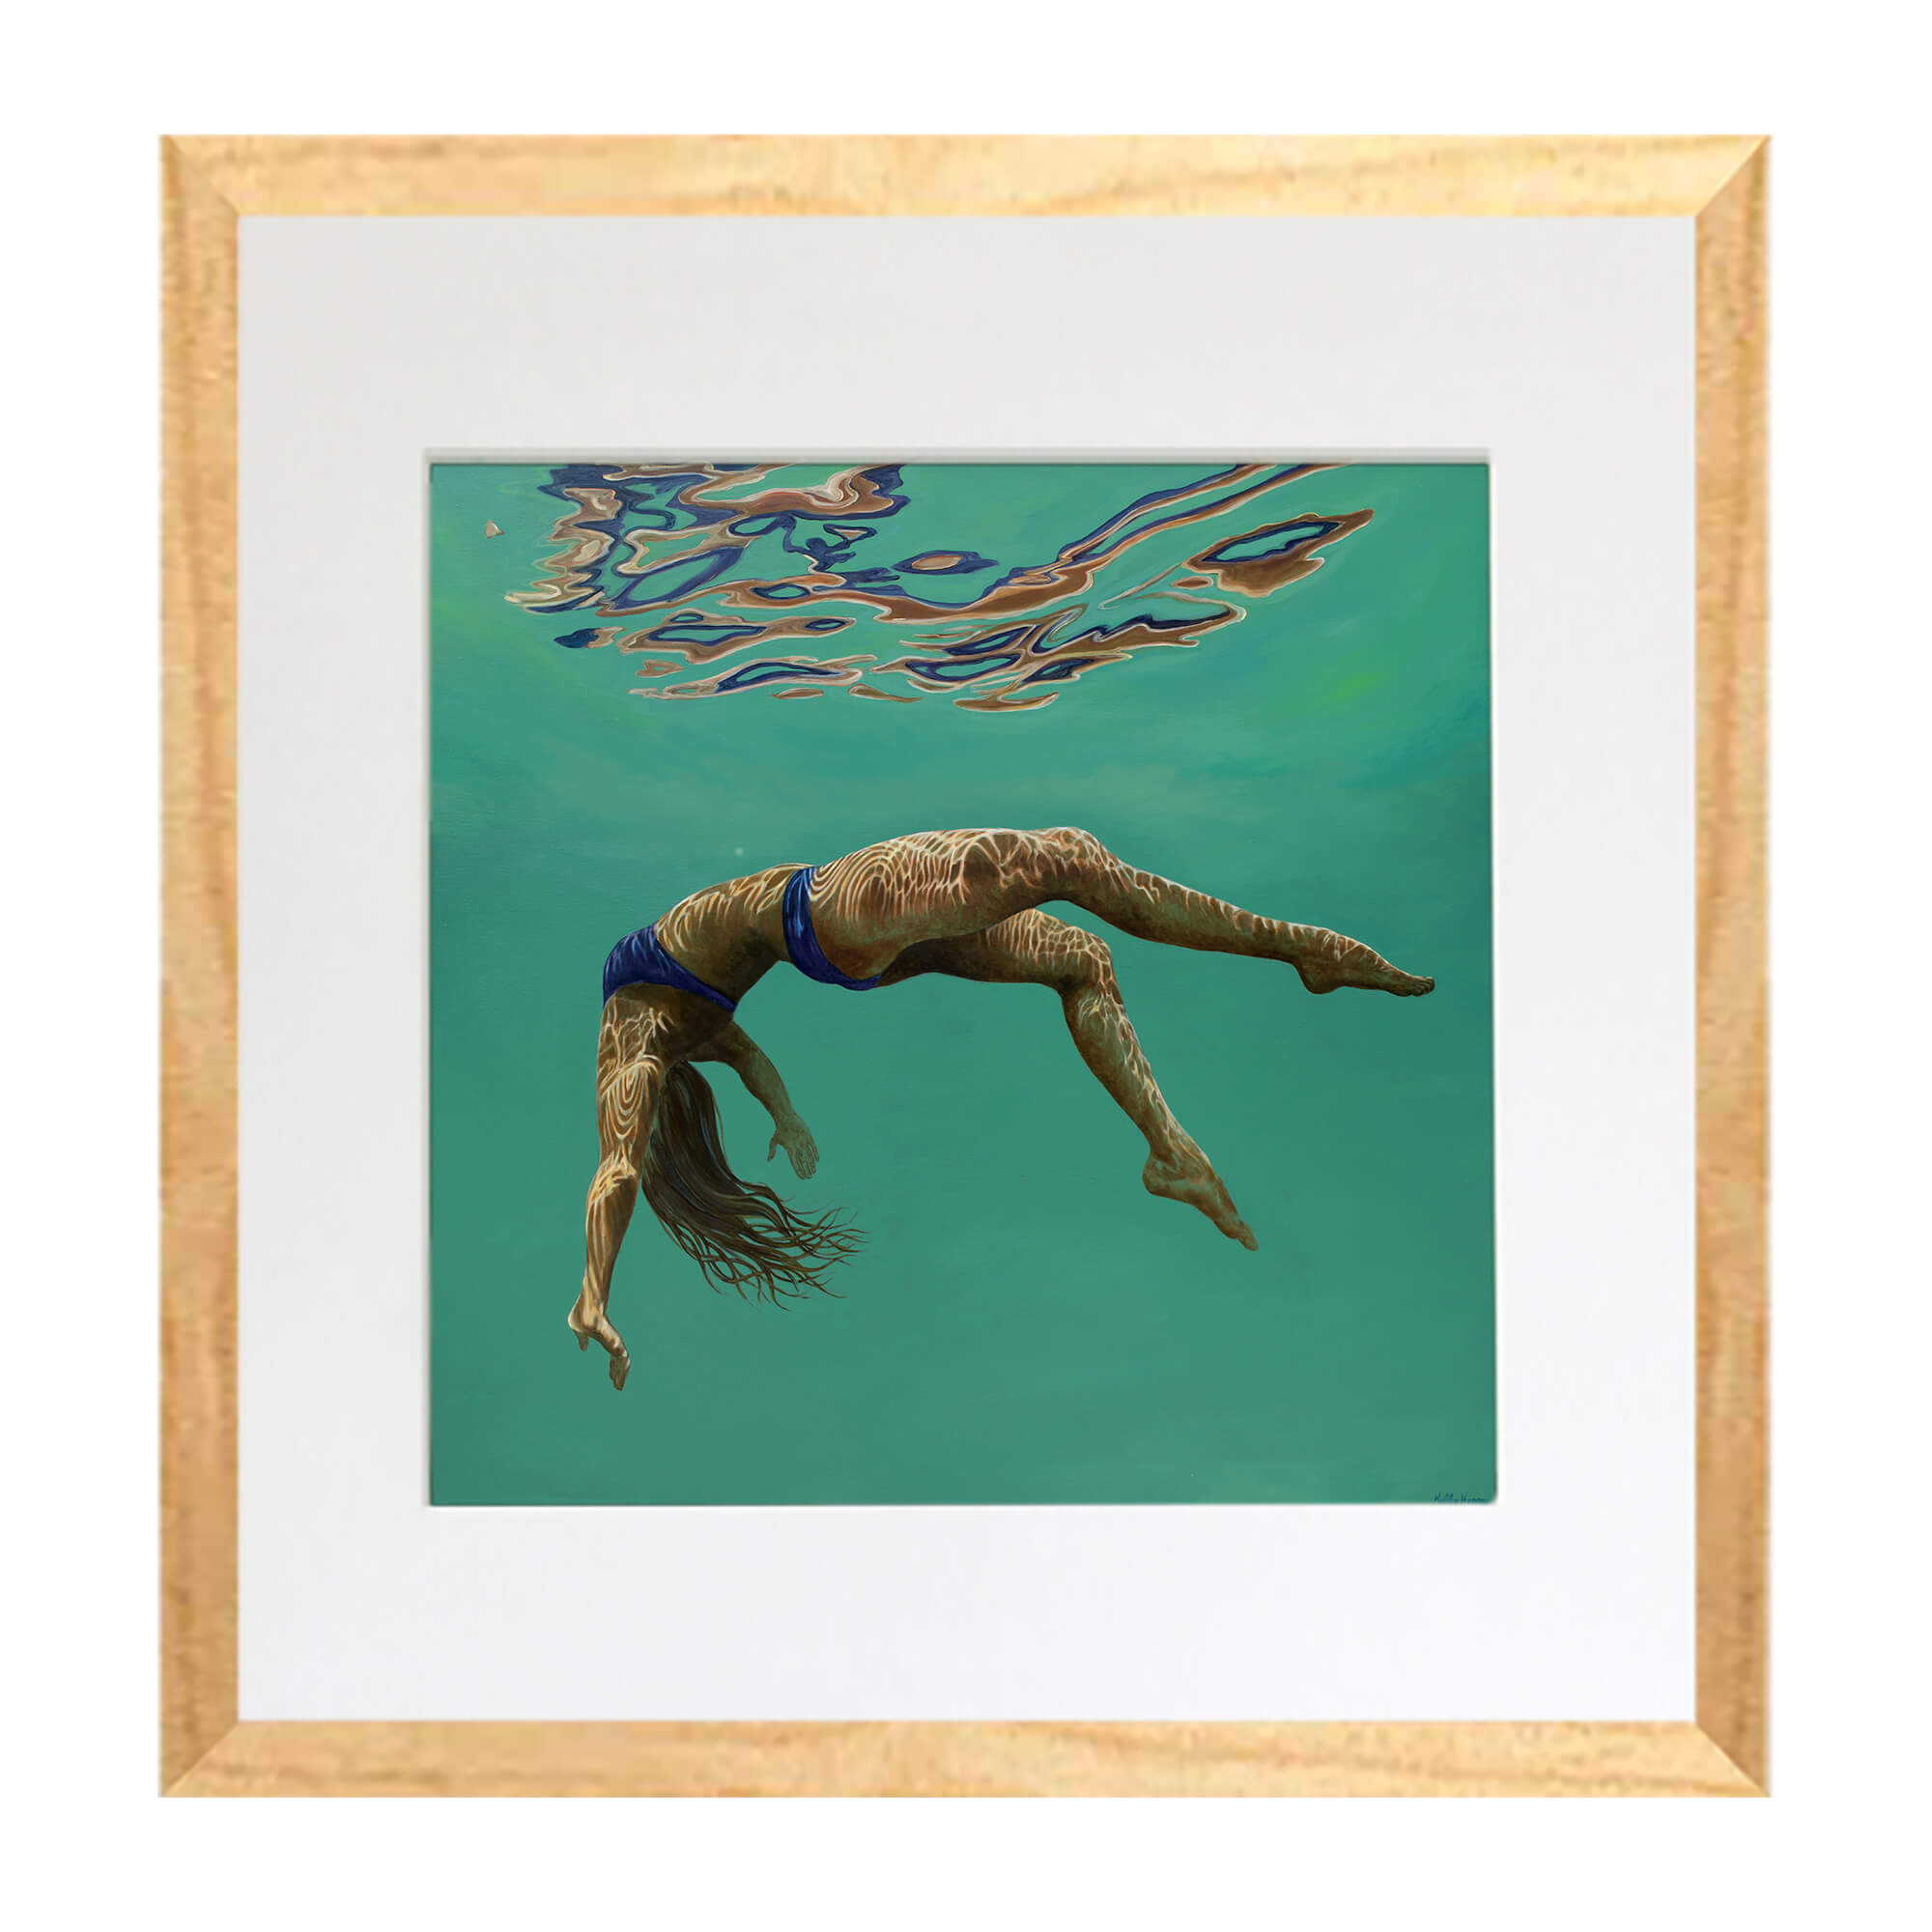 Matted art print of a woman peacefully swimming underwater by Hawaii artist Kelly Keane